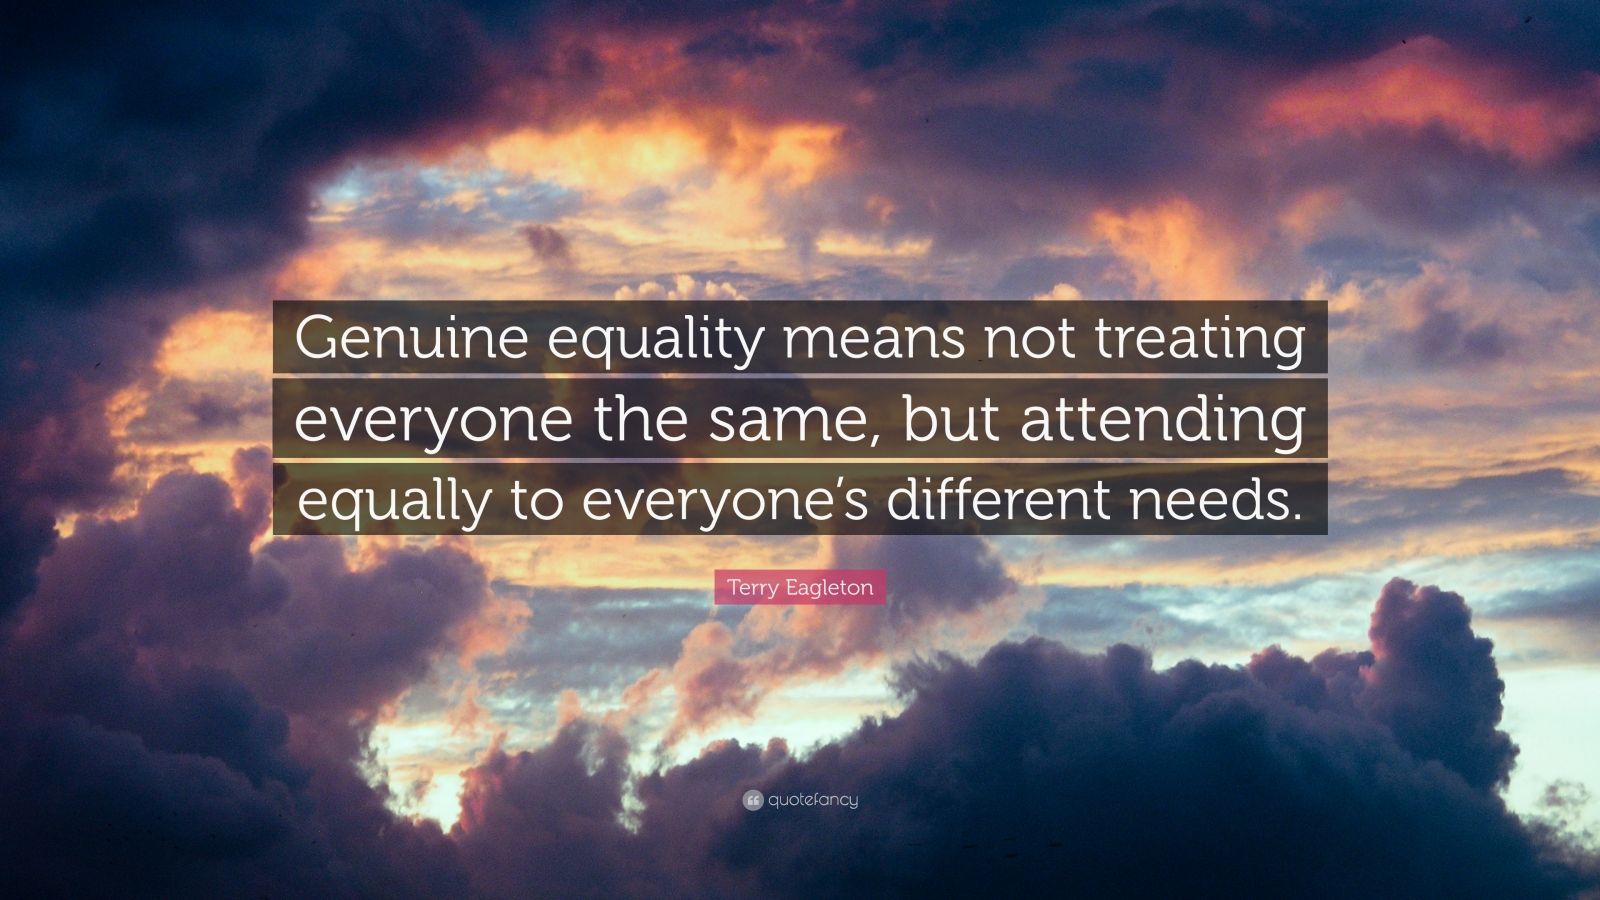 Terry Eagleton Quote: \u201cGenuine equality means not treating everyone the ...